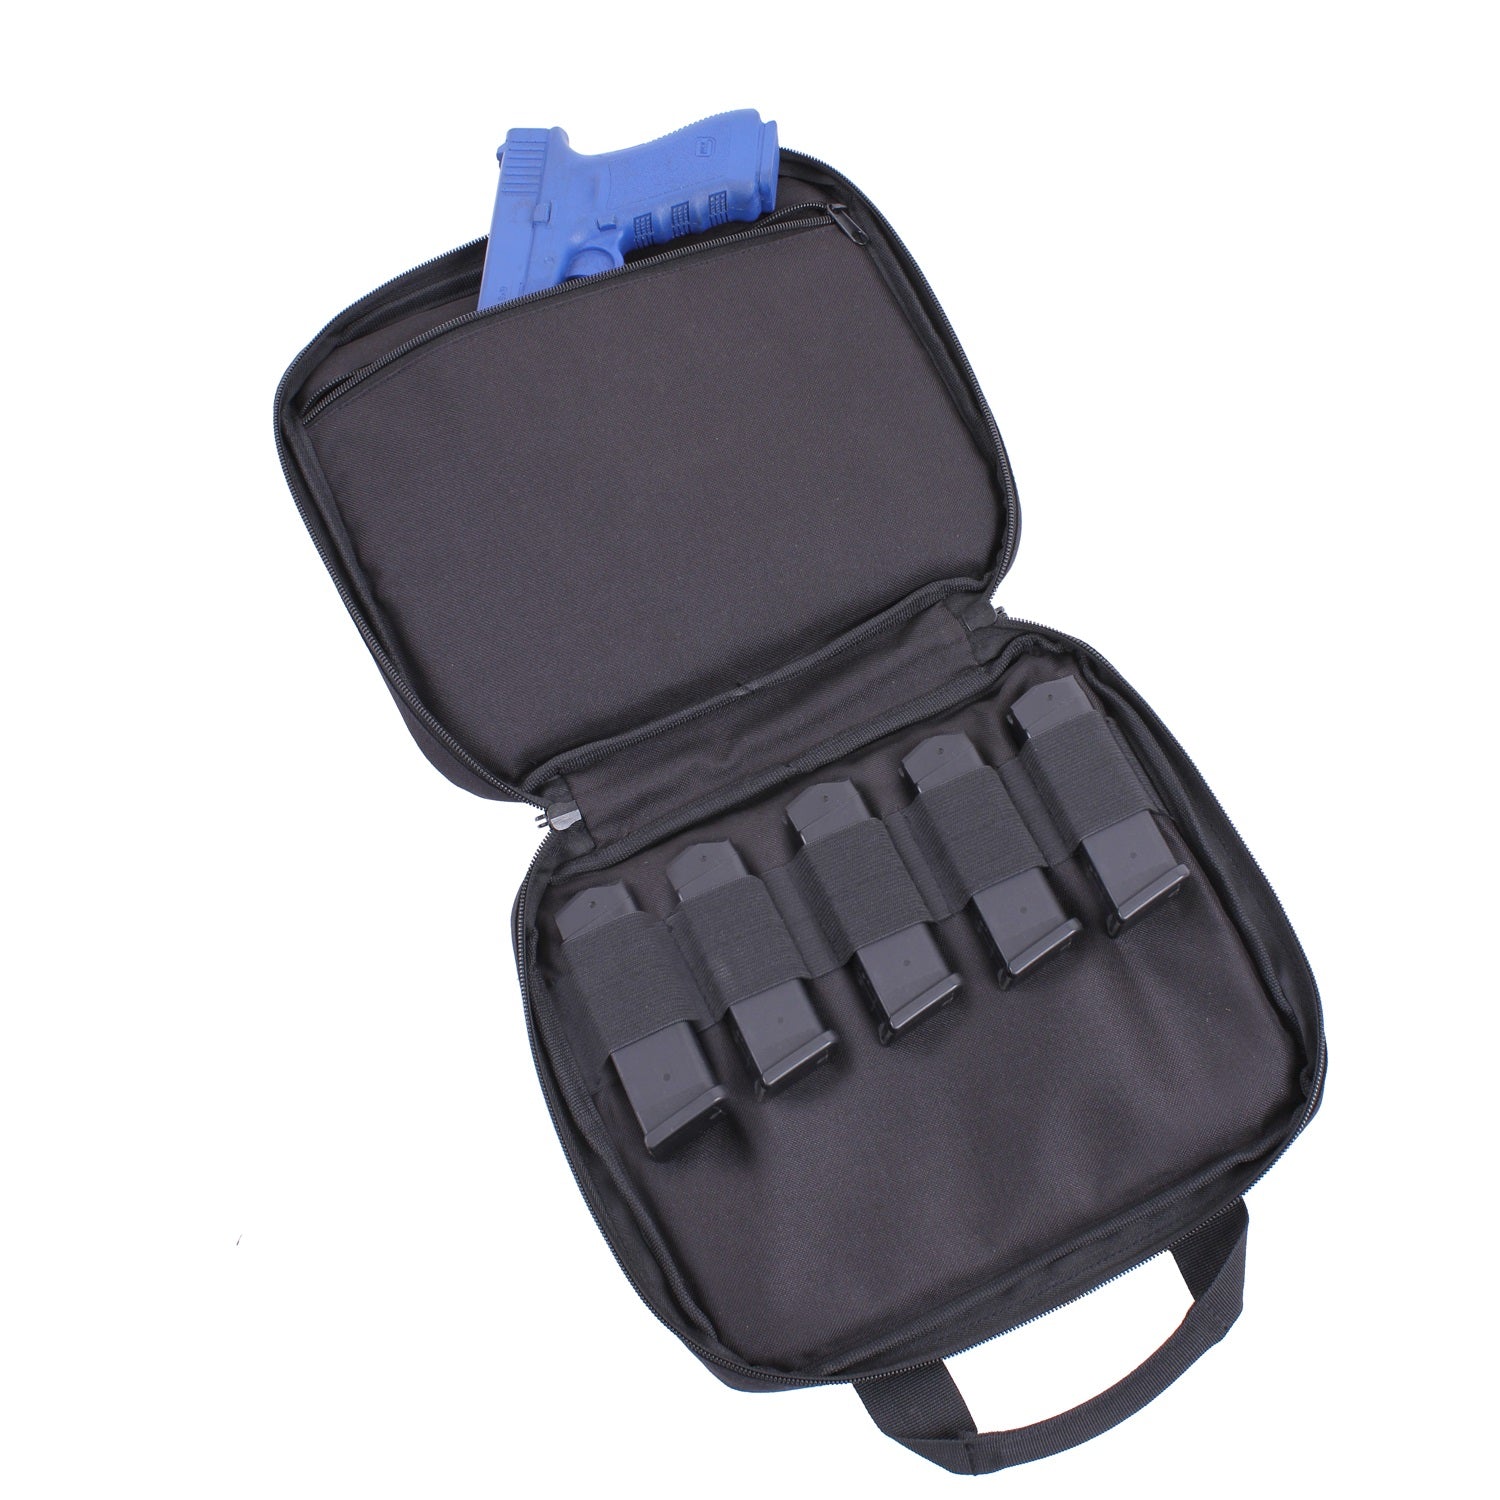 Rothco Double Pistol Carry Case